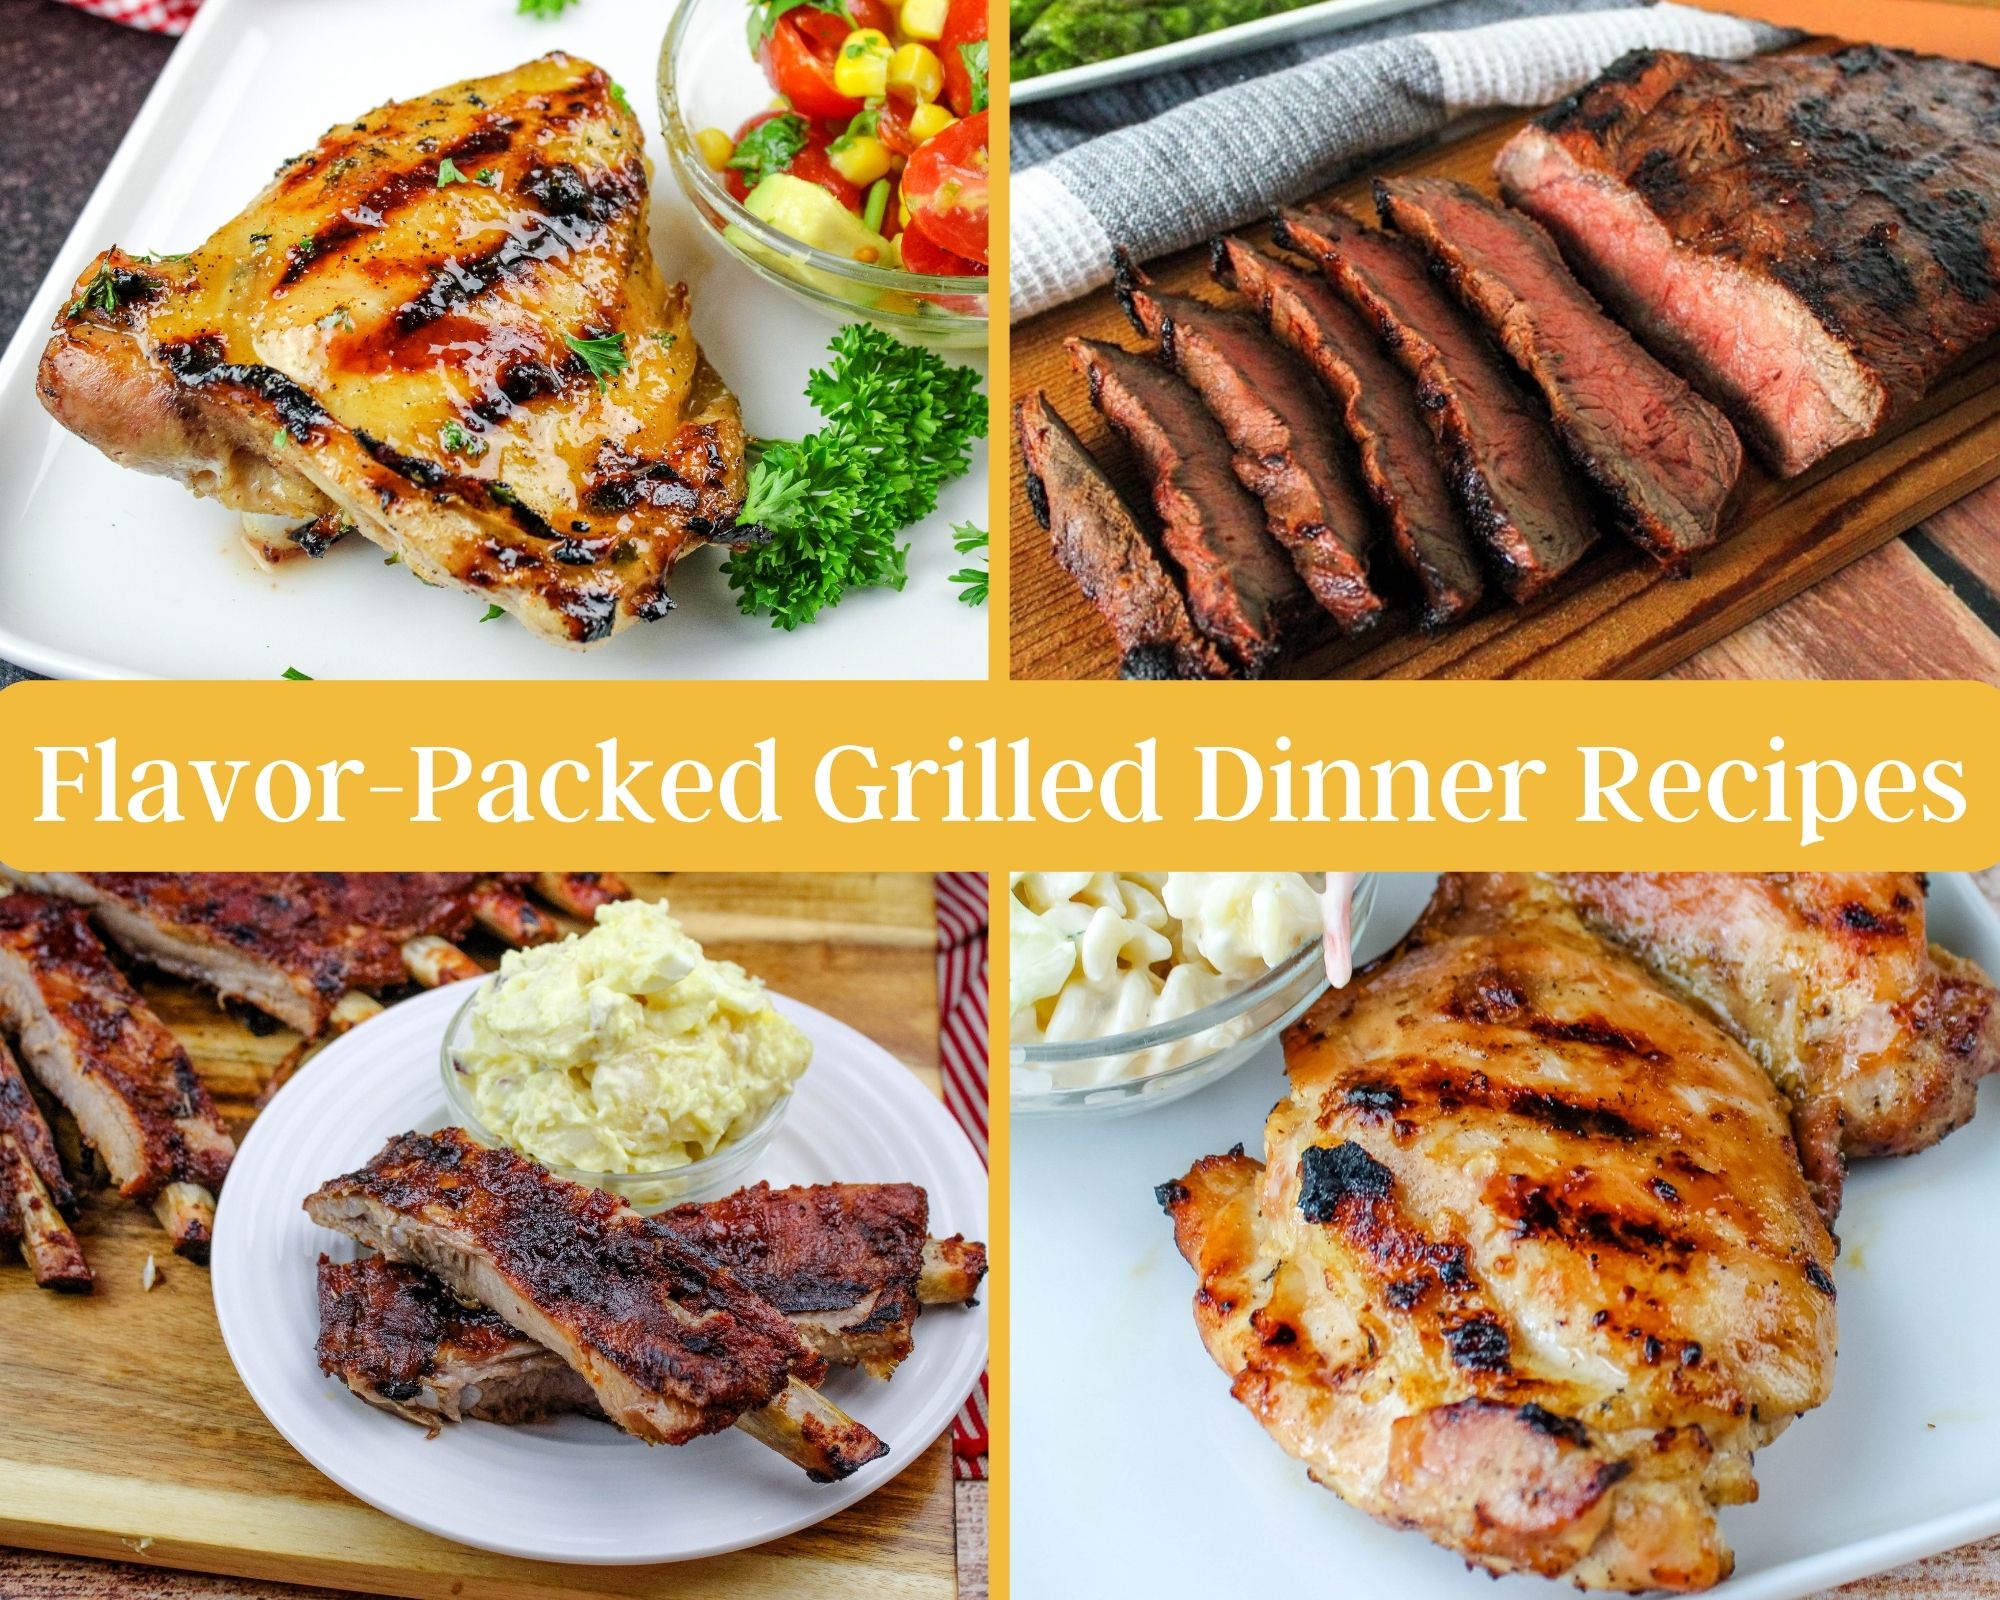 Flavor-Packed Grilled Dinner Recipes